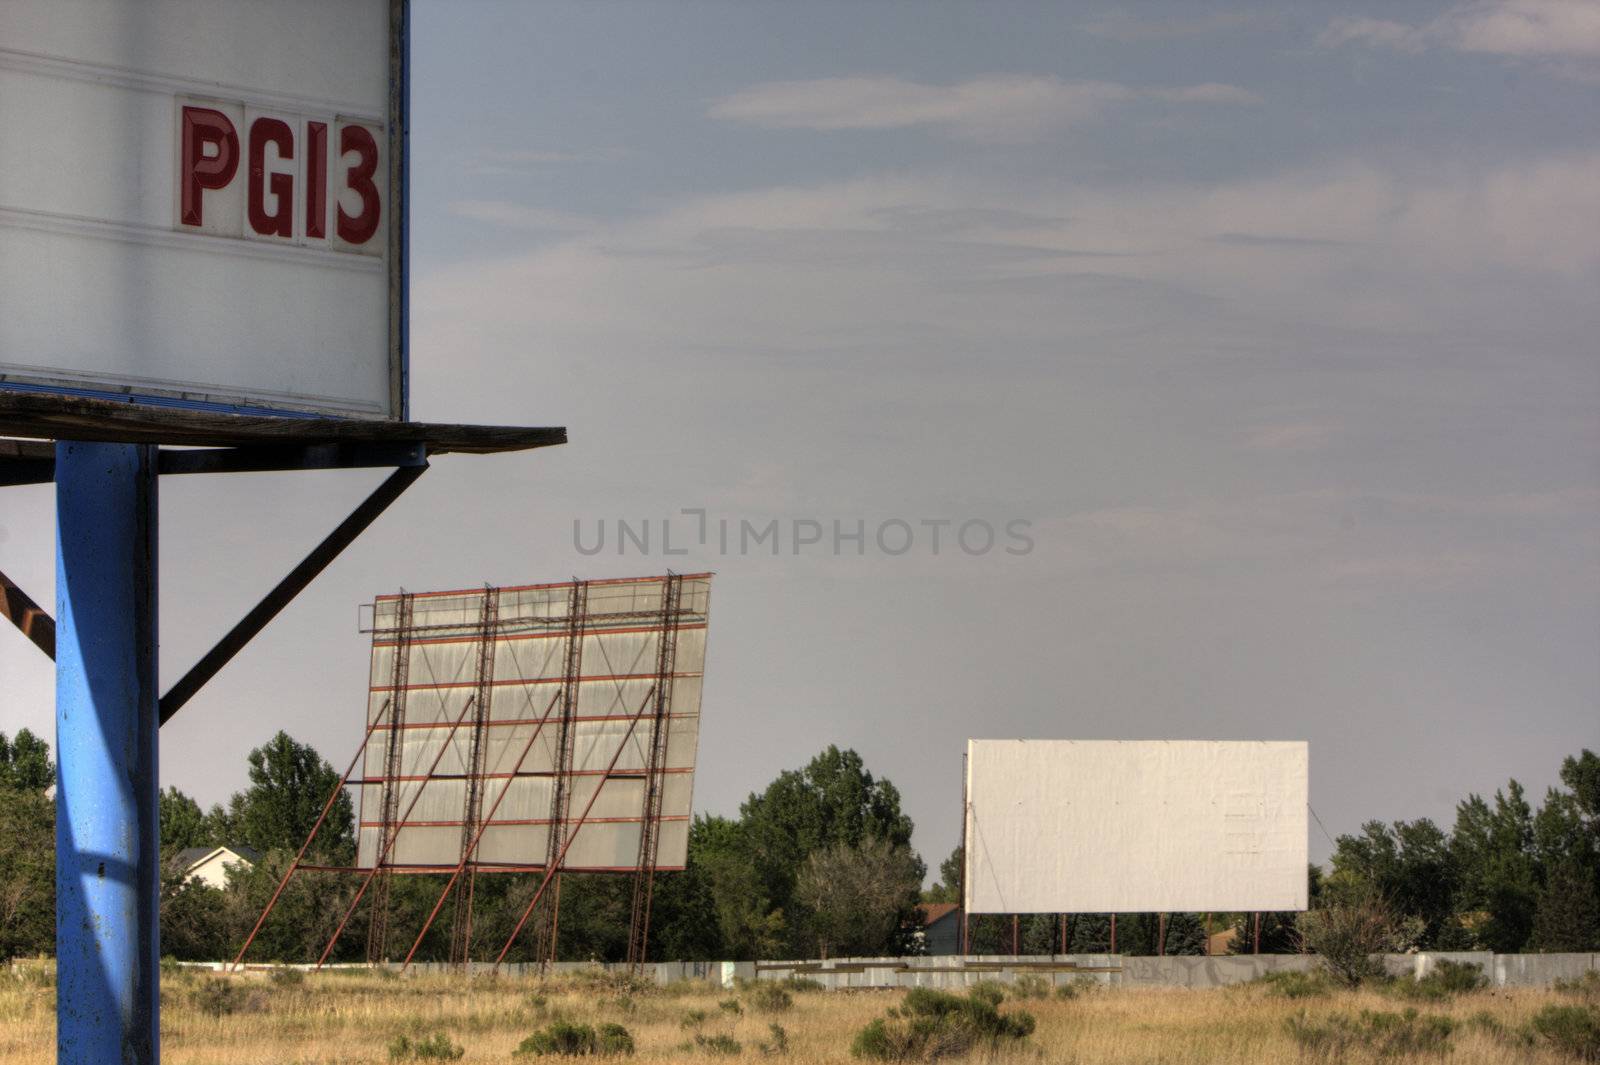 drive in movie theater by PixelsAway